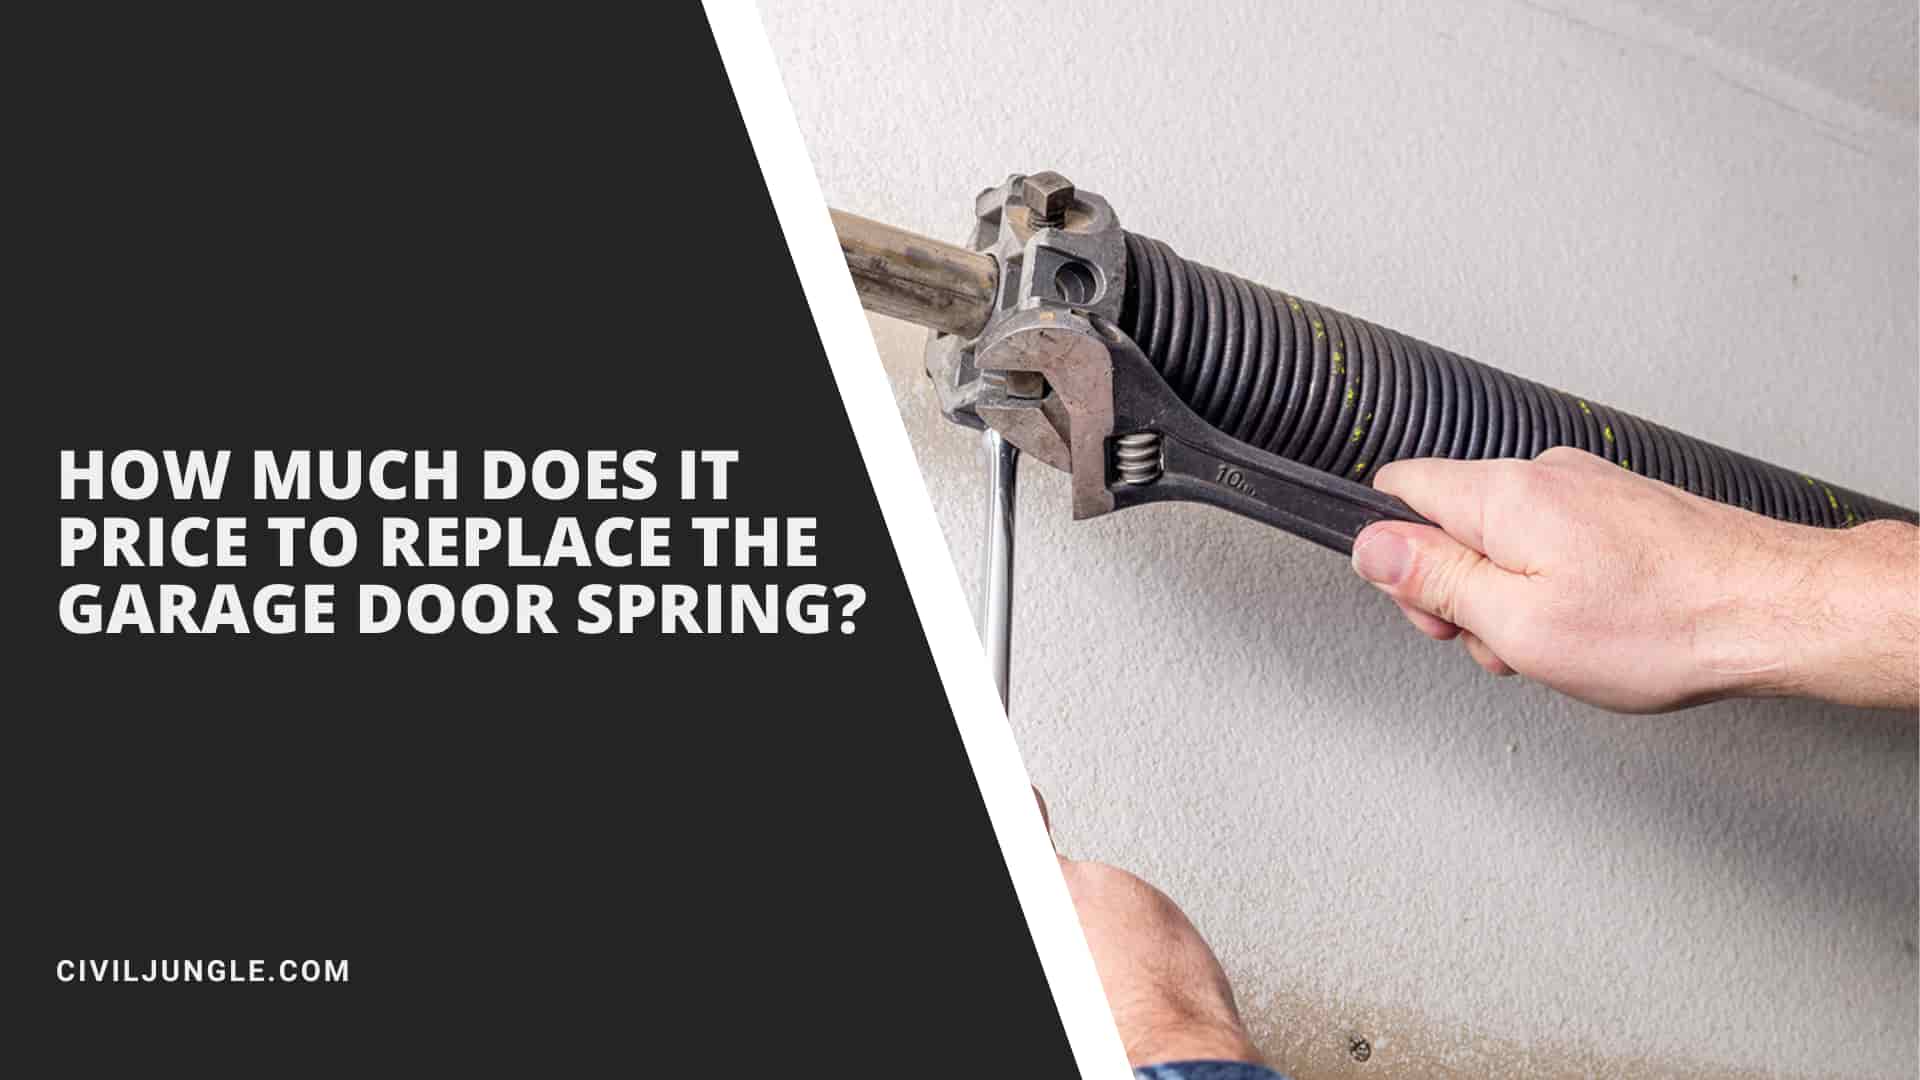 How Much Does It Price to Replace the Garage Door Spring?